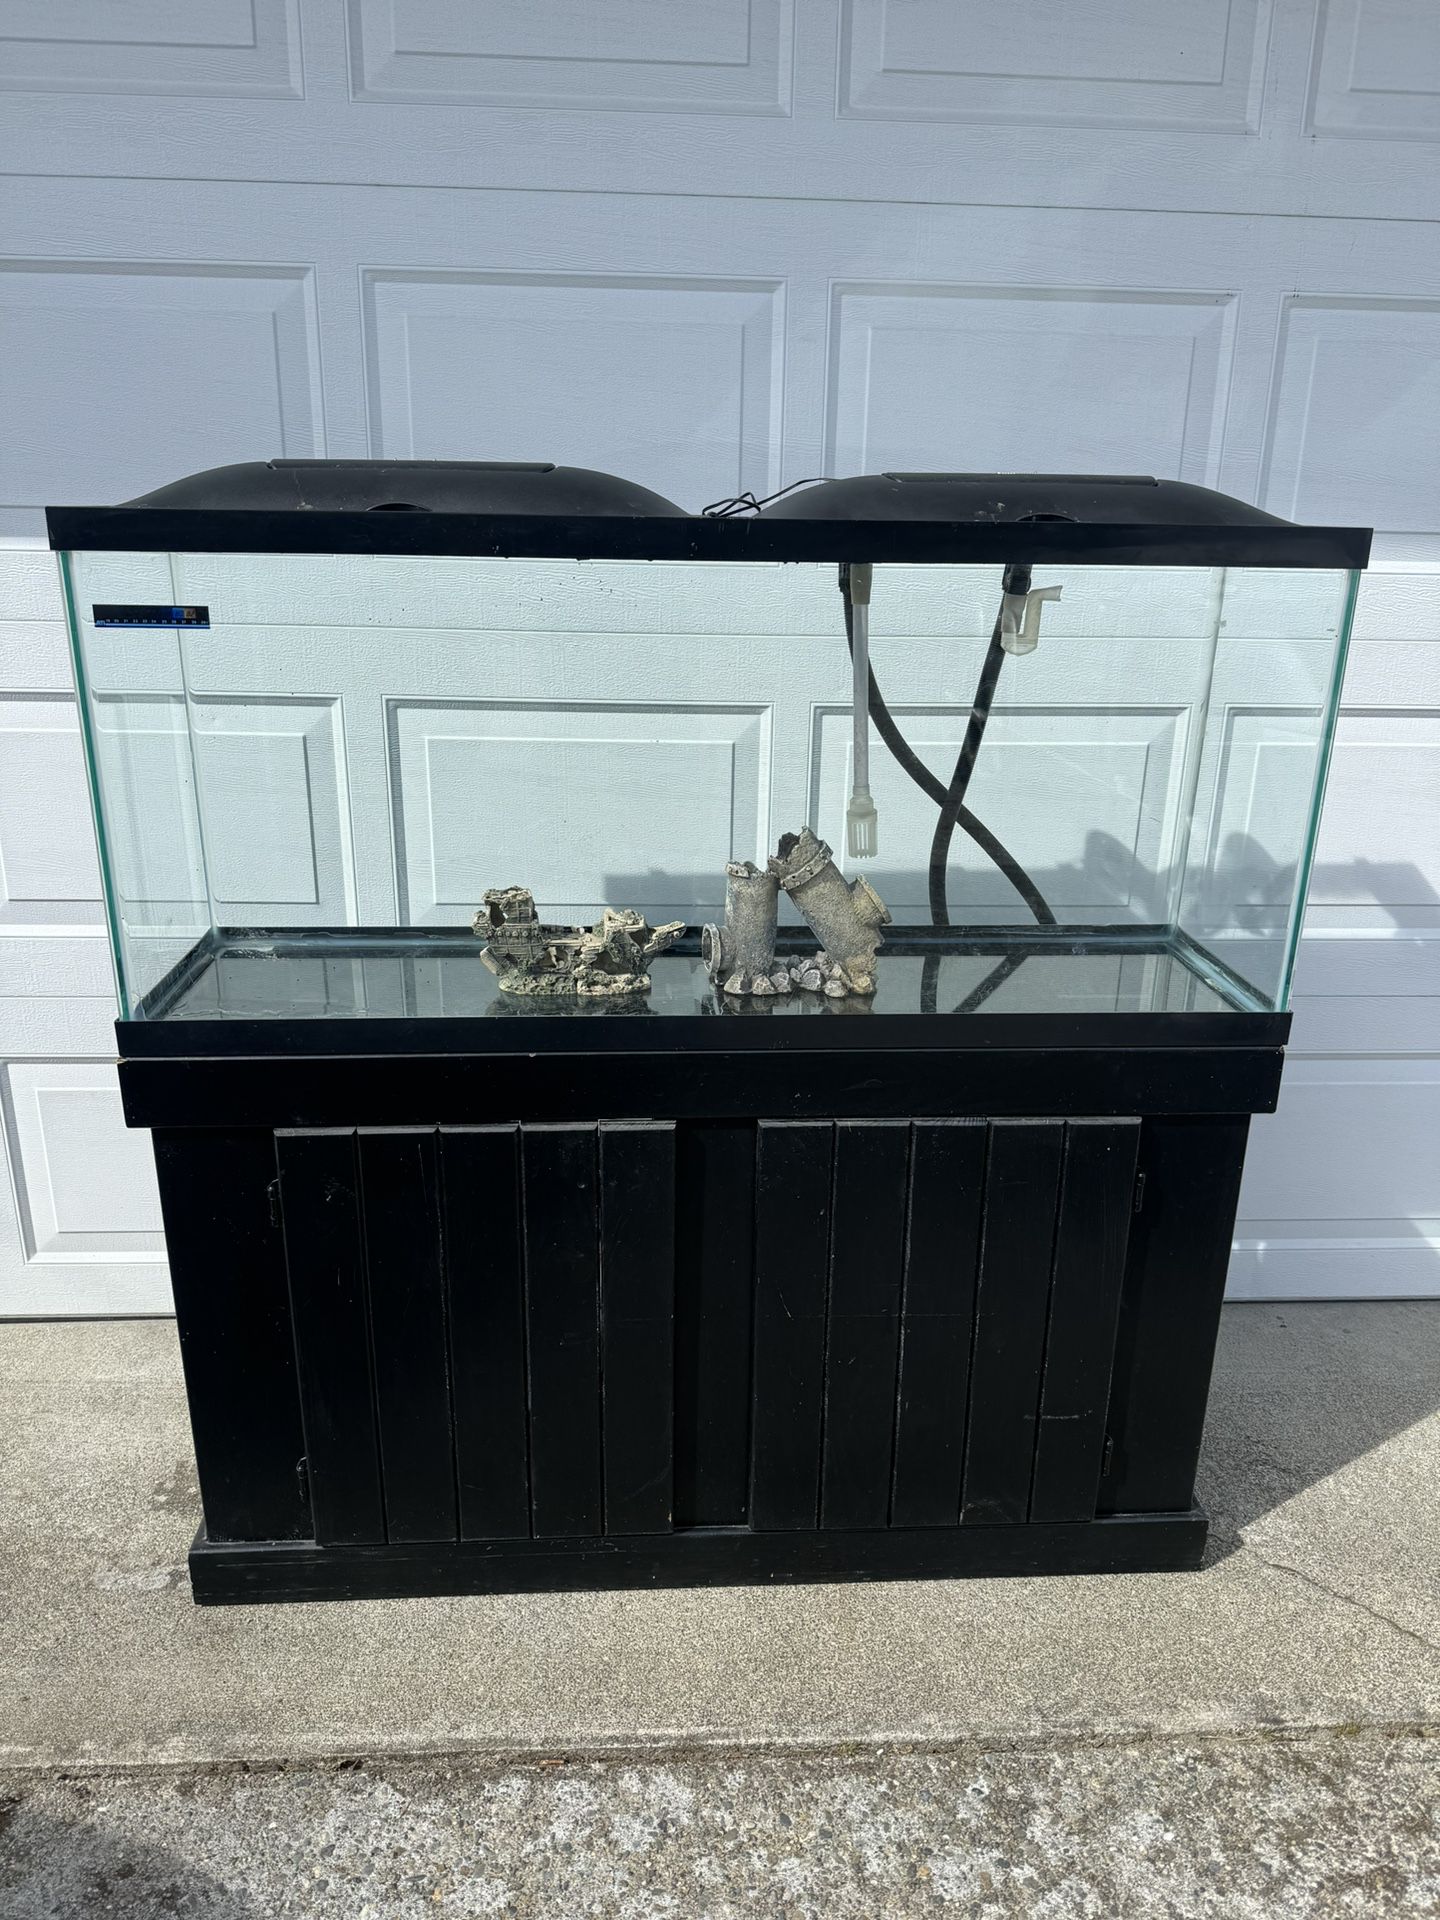 55 GALLONS FISH TANK STAND INLCUDED